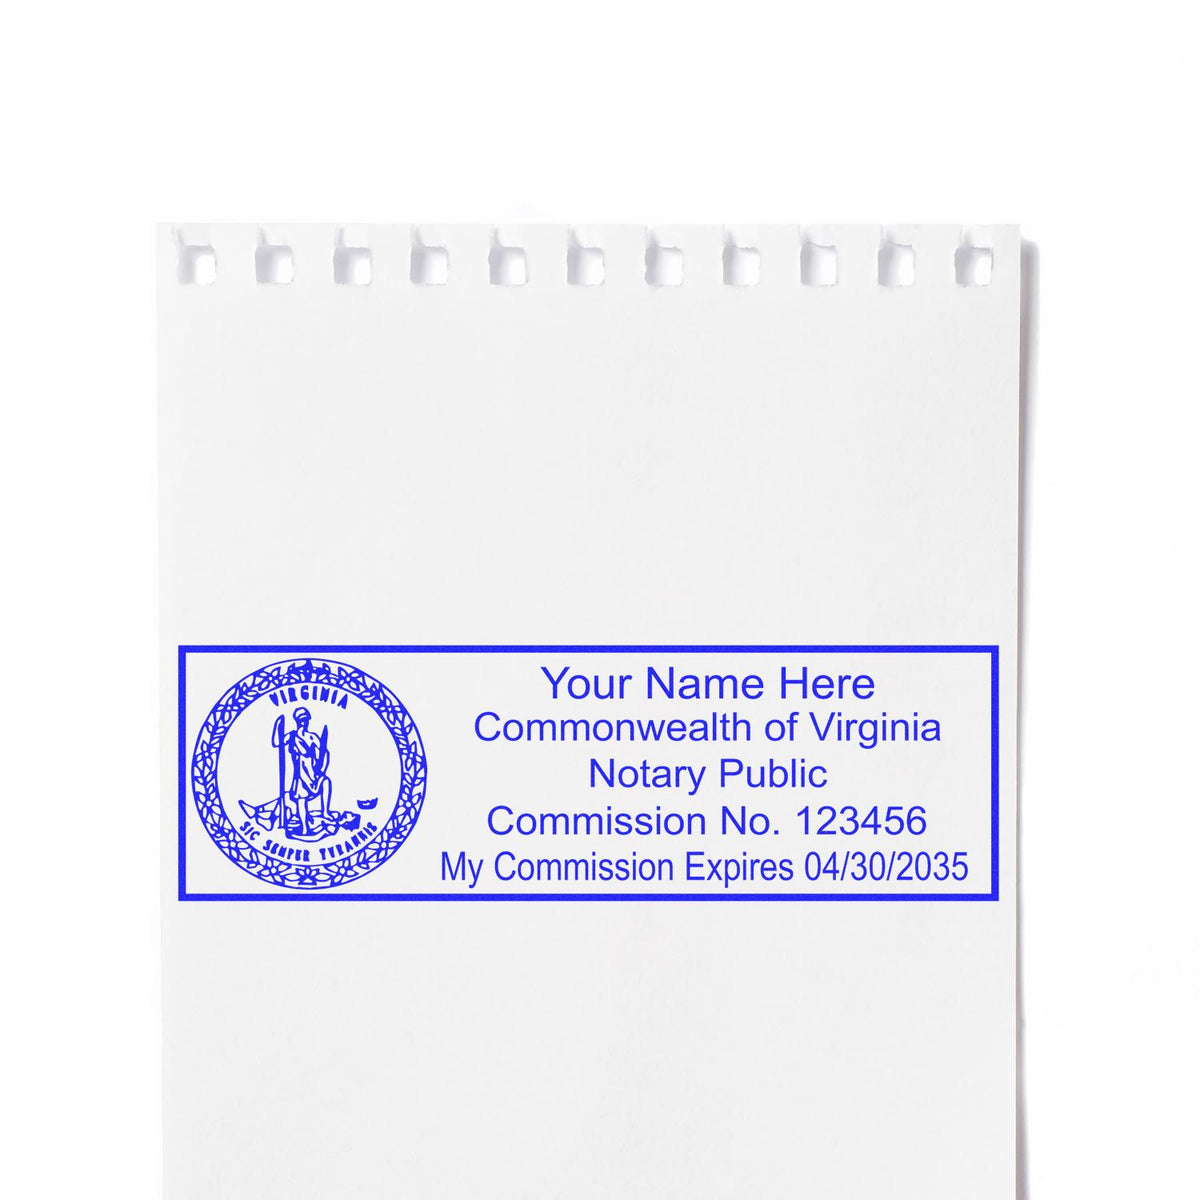 A stamped impression of the Super Slim Virginia Notary Public Stamp in this stylish lifestyle photo, setting the tone for a unique and personalized product.